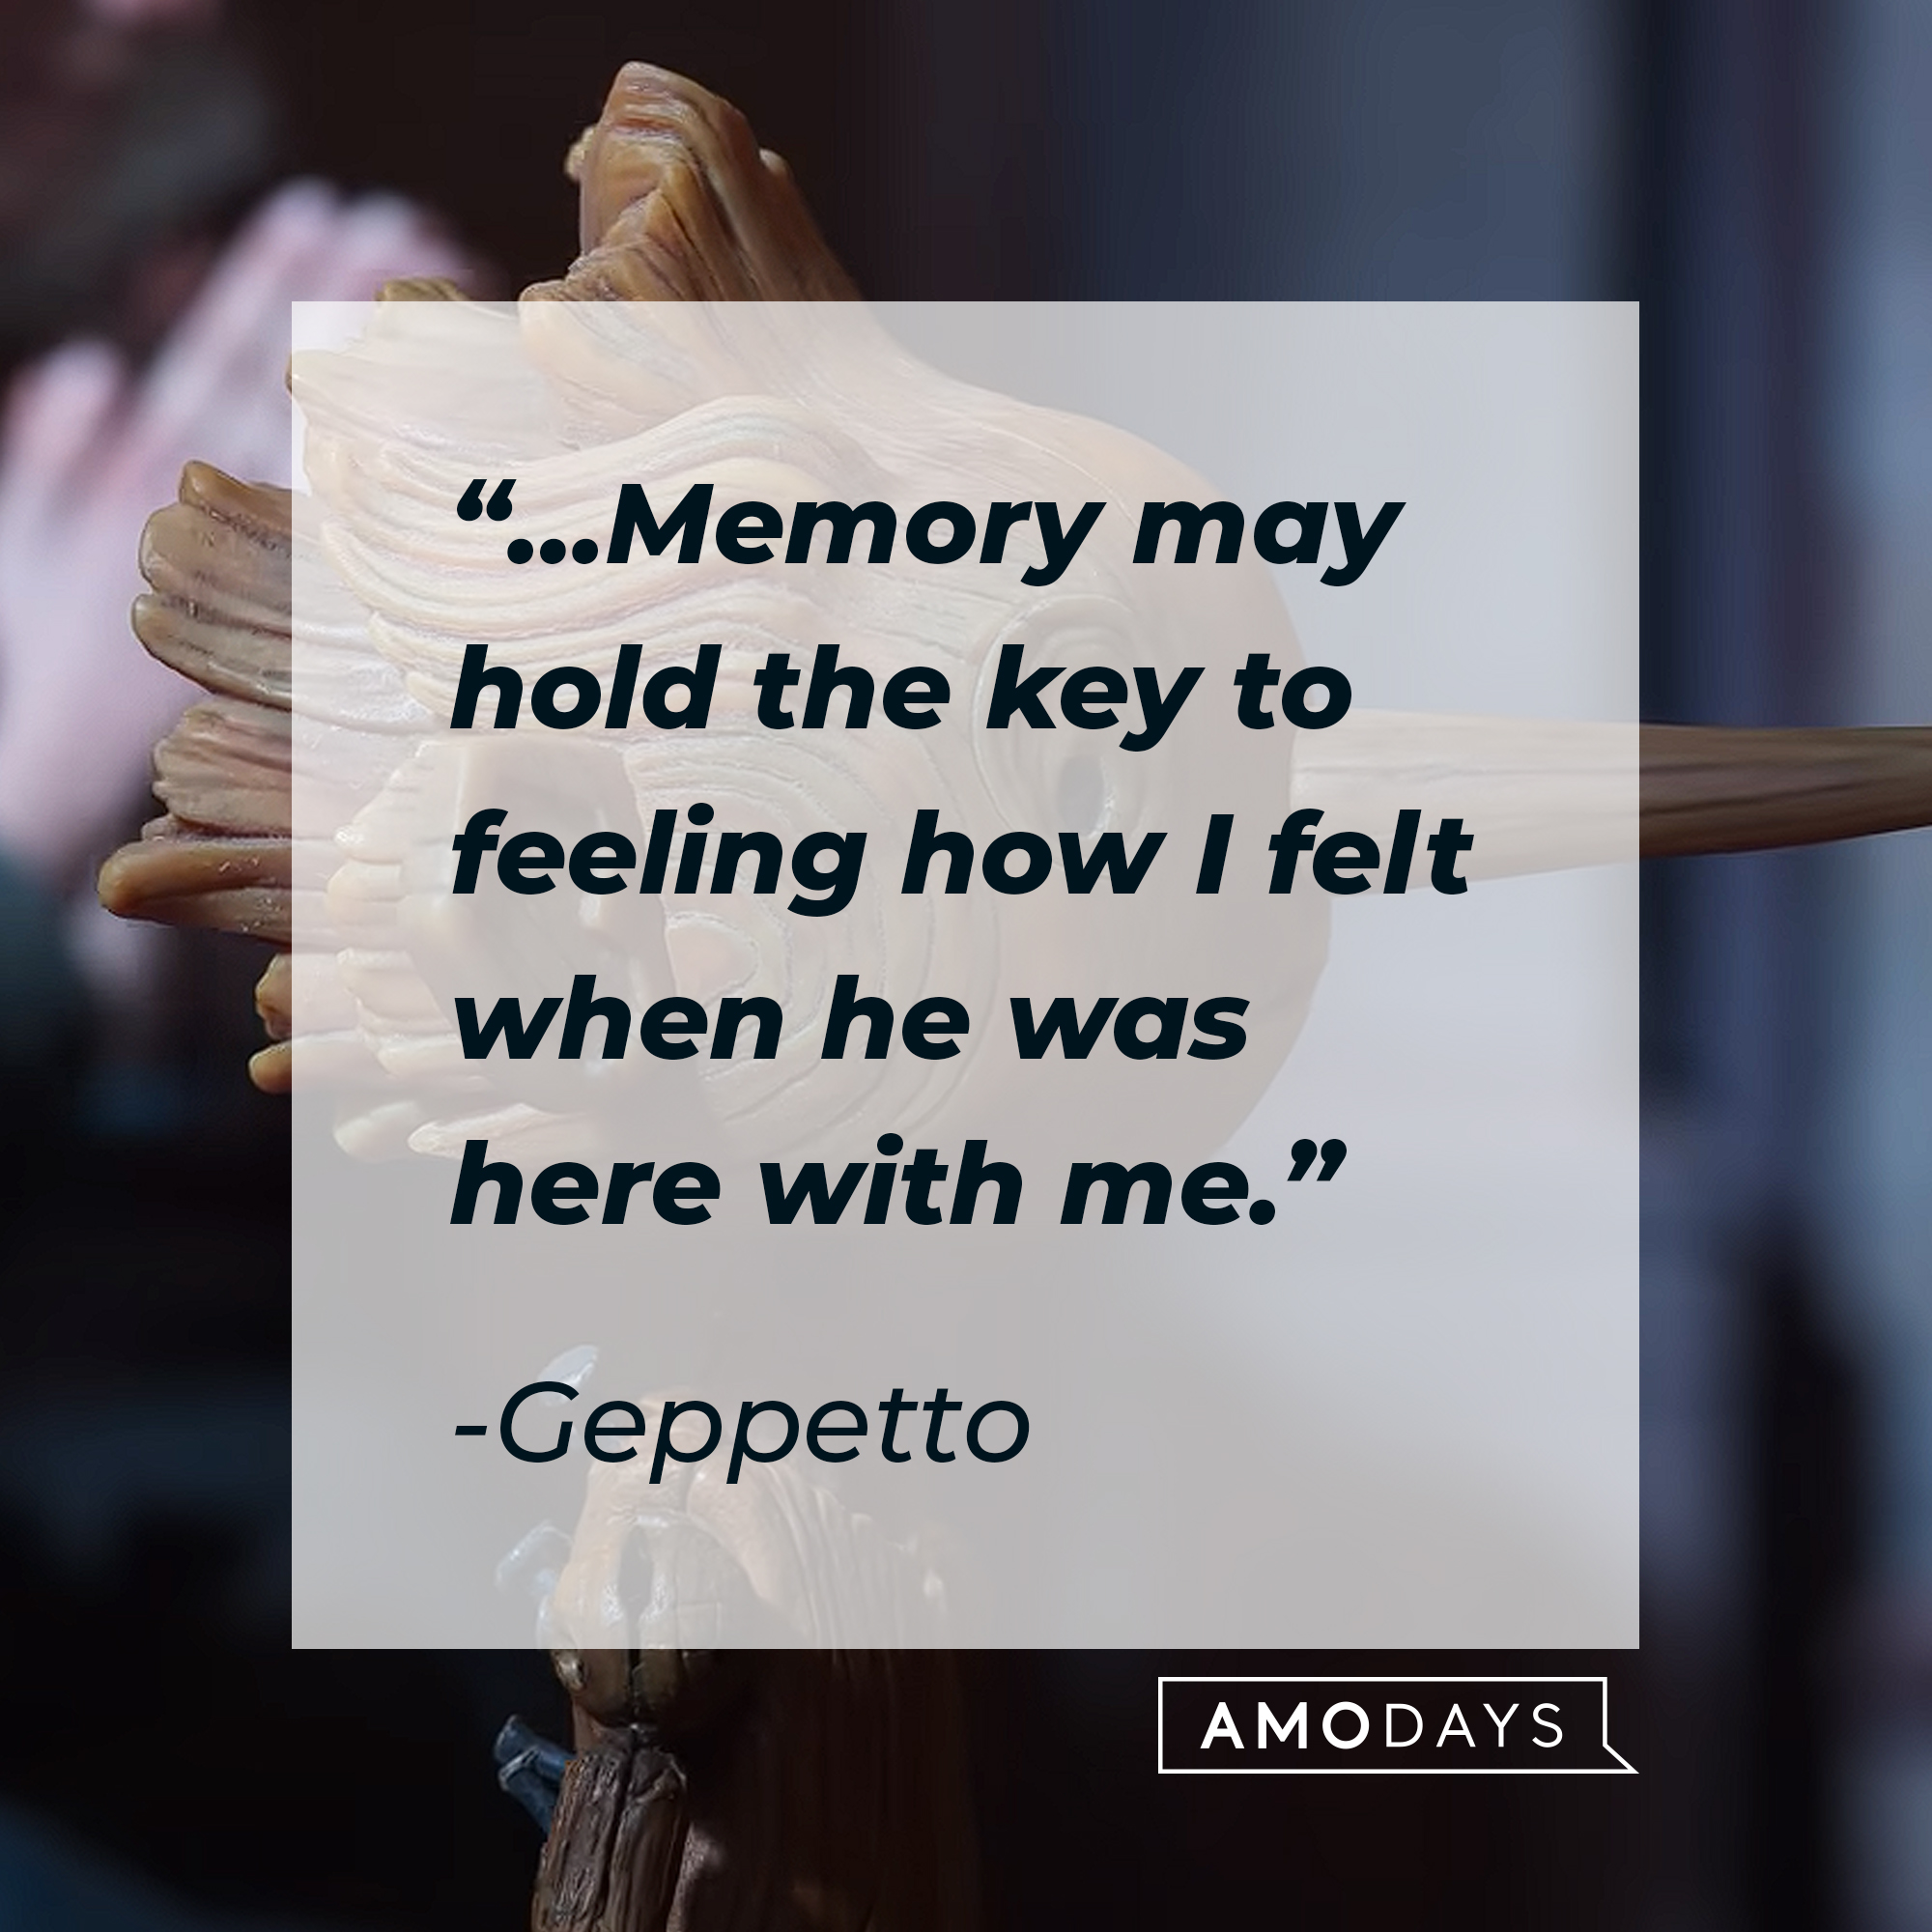 Geppetto's quote: "…Memory may hold the key to feeling how I felt when he was here with me." | Image: AmoDays